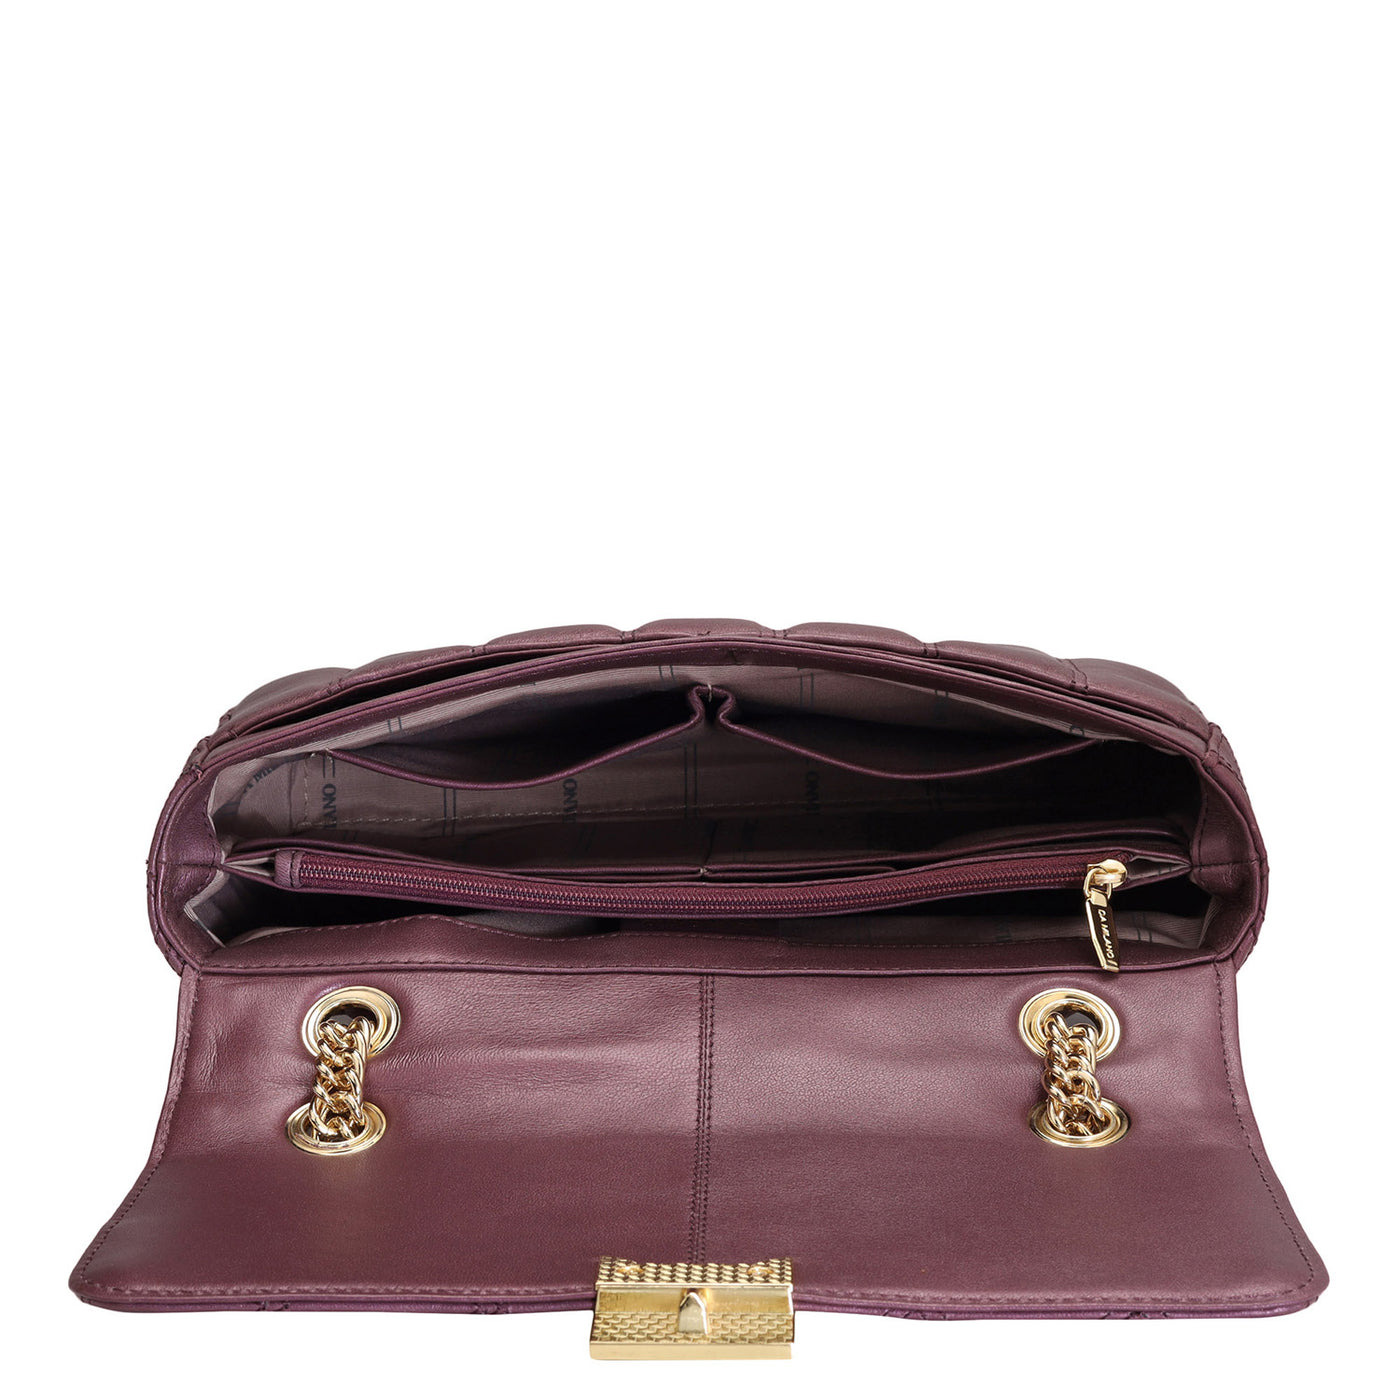 Small Quilting Leather Sahoulder Bag - Plum